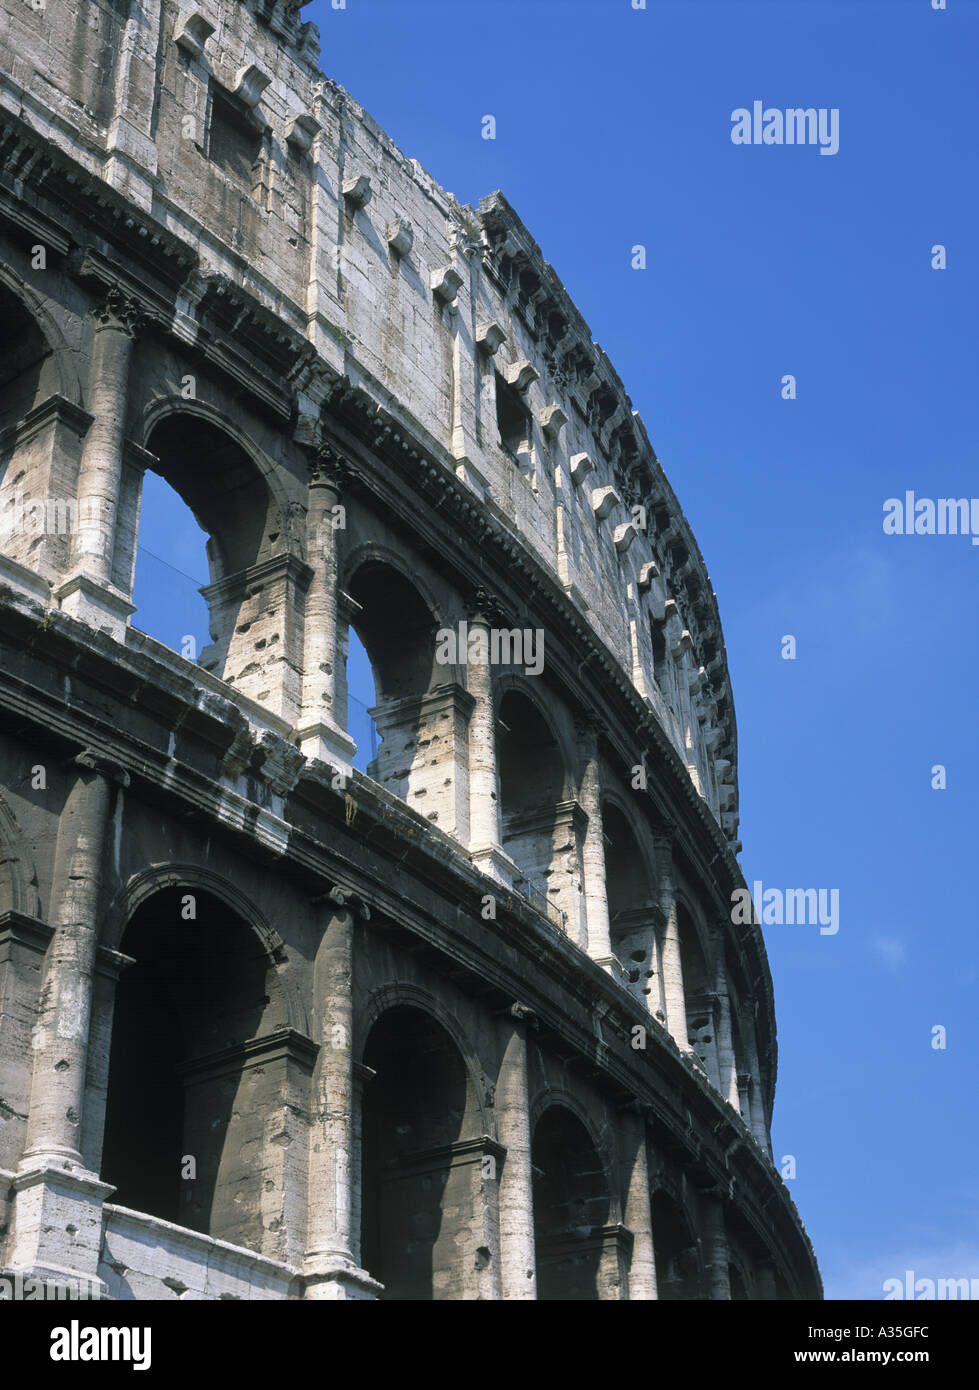 The Colosseum in Rome Italy Stock Photo